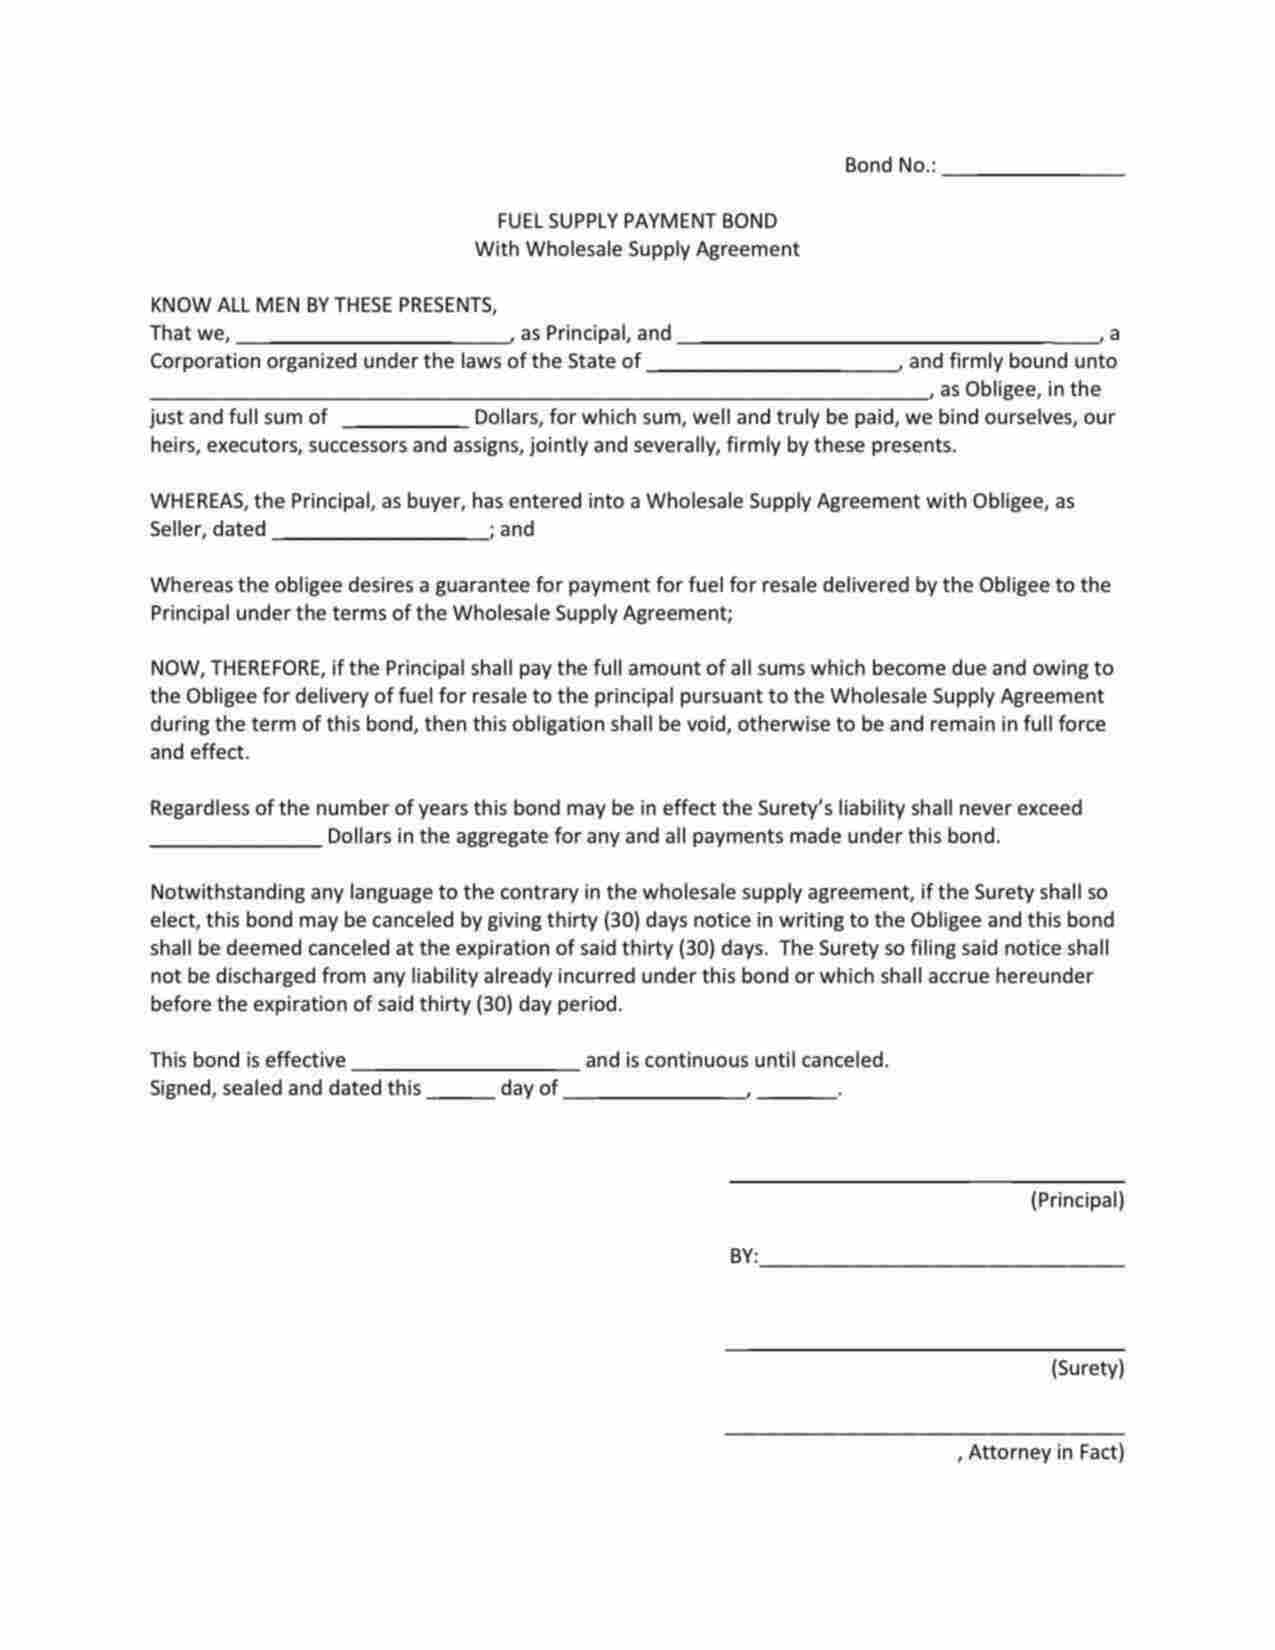 New York Fuel Supply Payment Bond Form